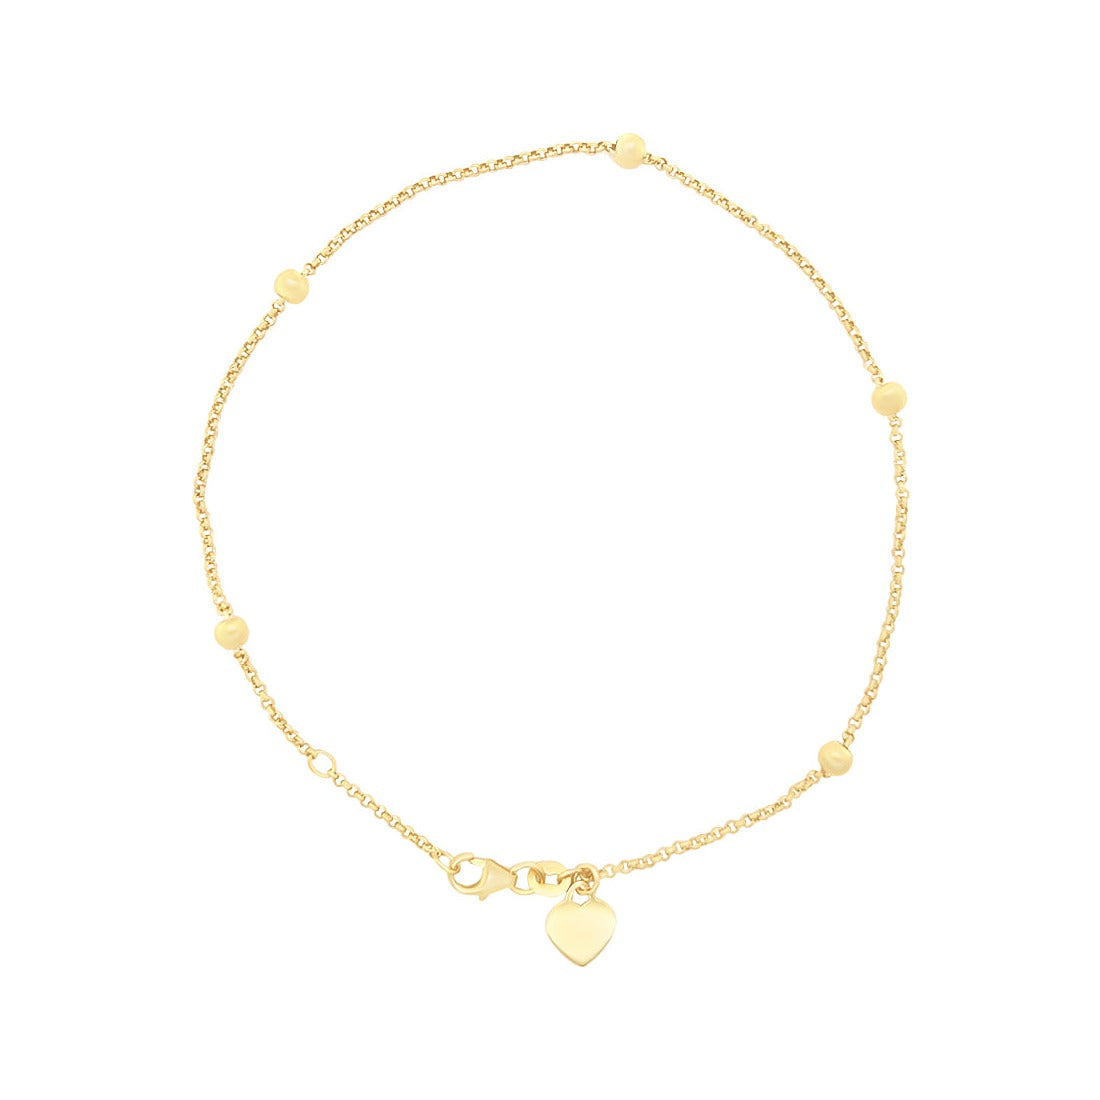 Heart Charm Belcher Anklet in 9ct Yellow Gold Silver Infused 27cm Anklet Bevilles 